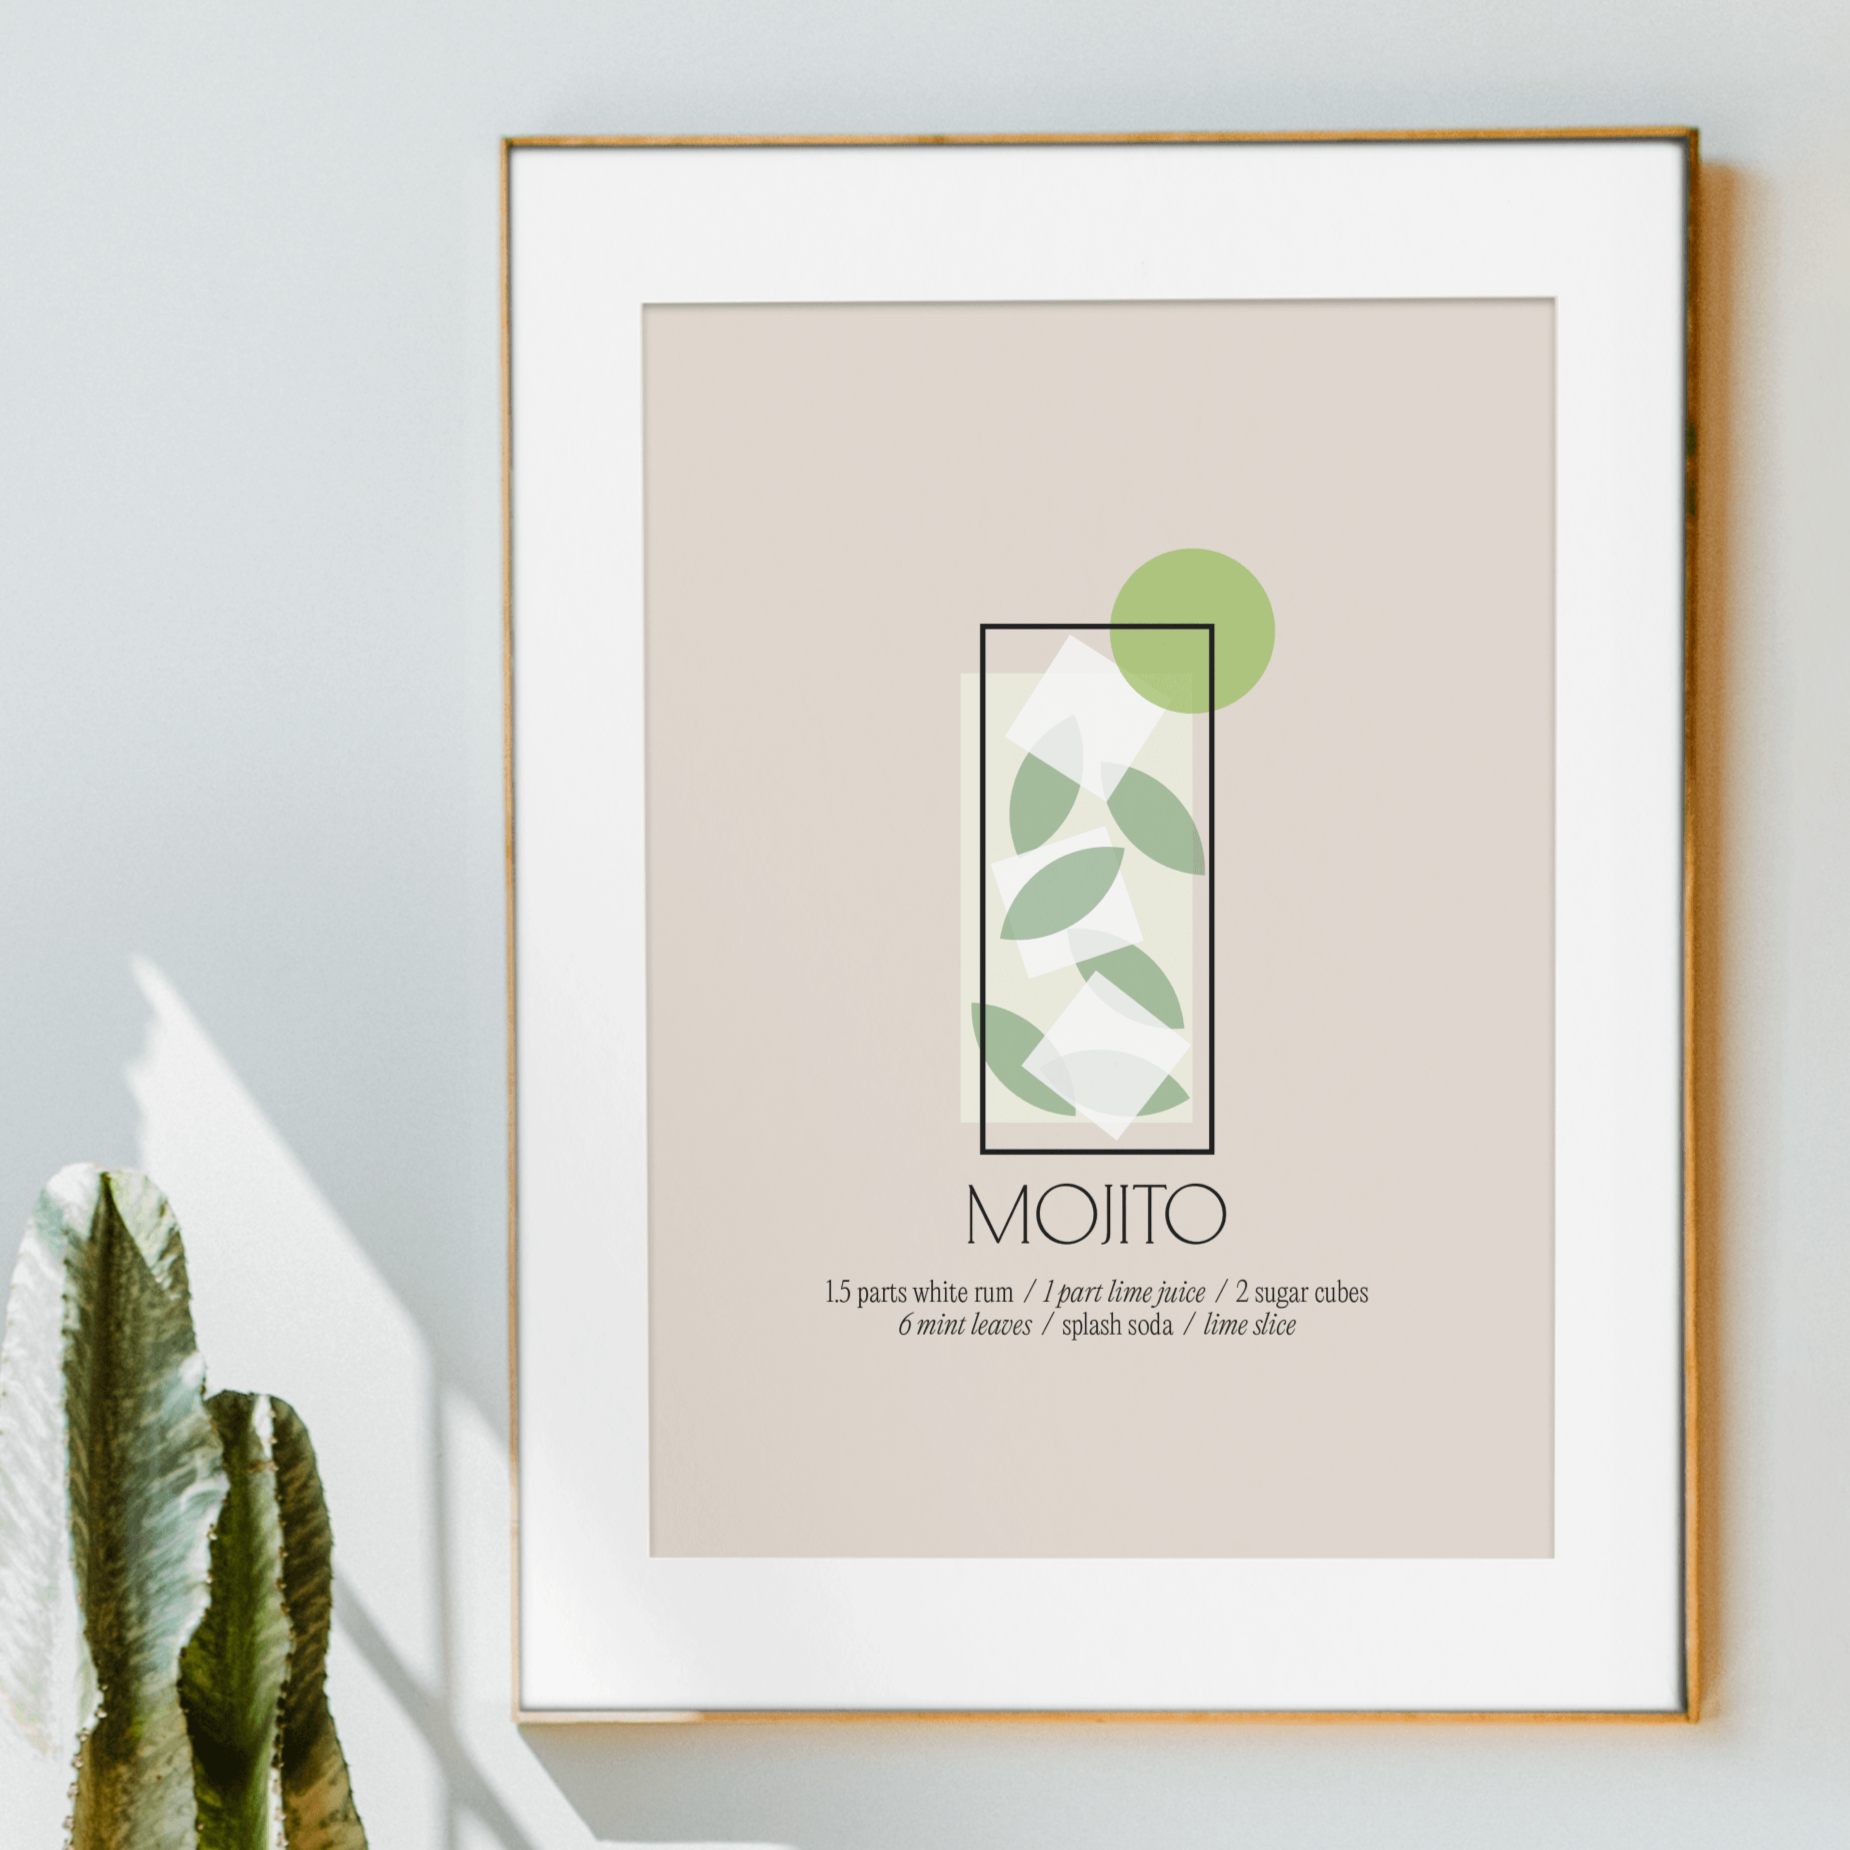 Mojito Cocktail, Poster - THE WALL SNOB